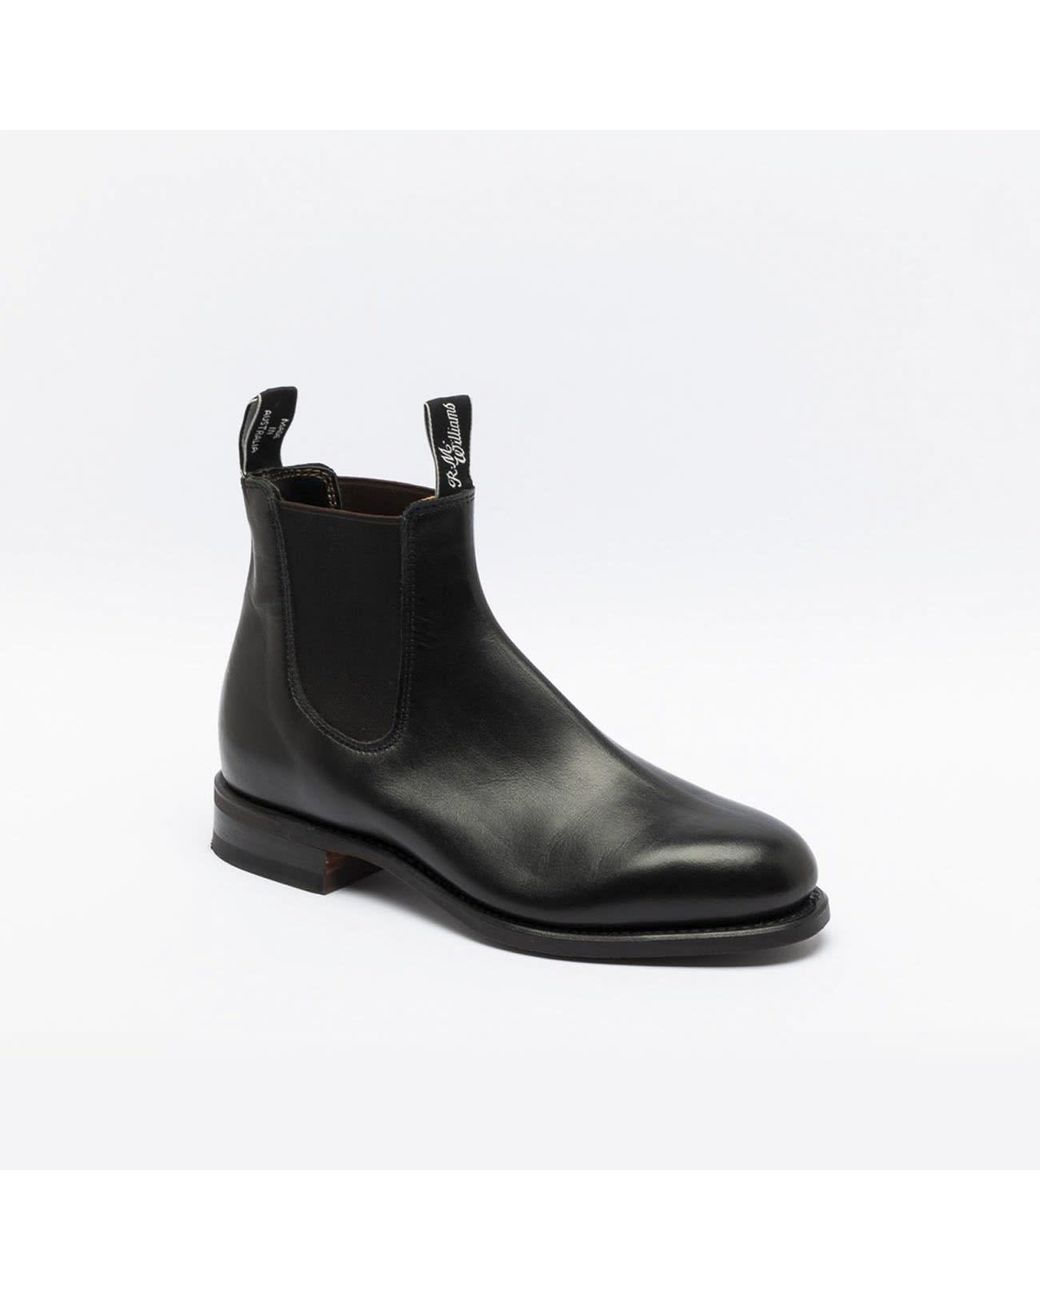 R.M. WILLIAMS BOOTS THE YEARLING G SUEDE BLACK